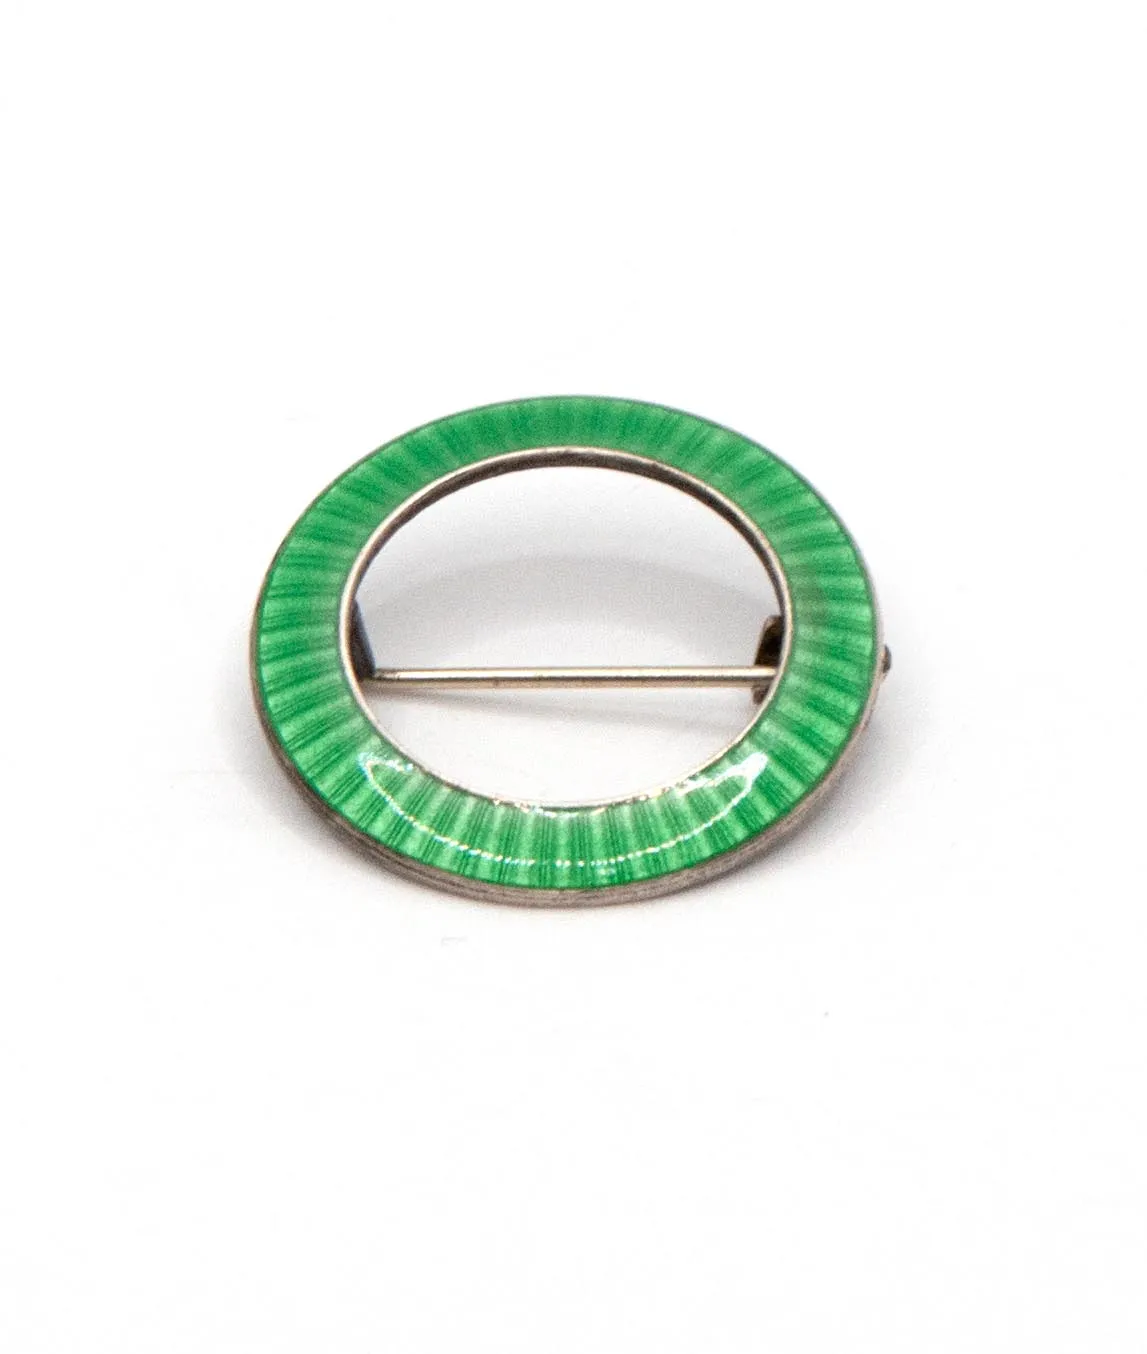 JA&S green enamelled ring shaped brooch pin set in silver on a white background tilted at an angle